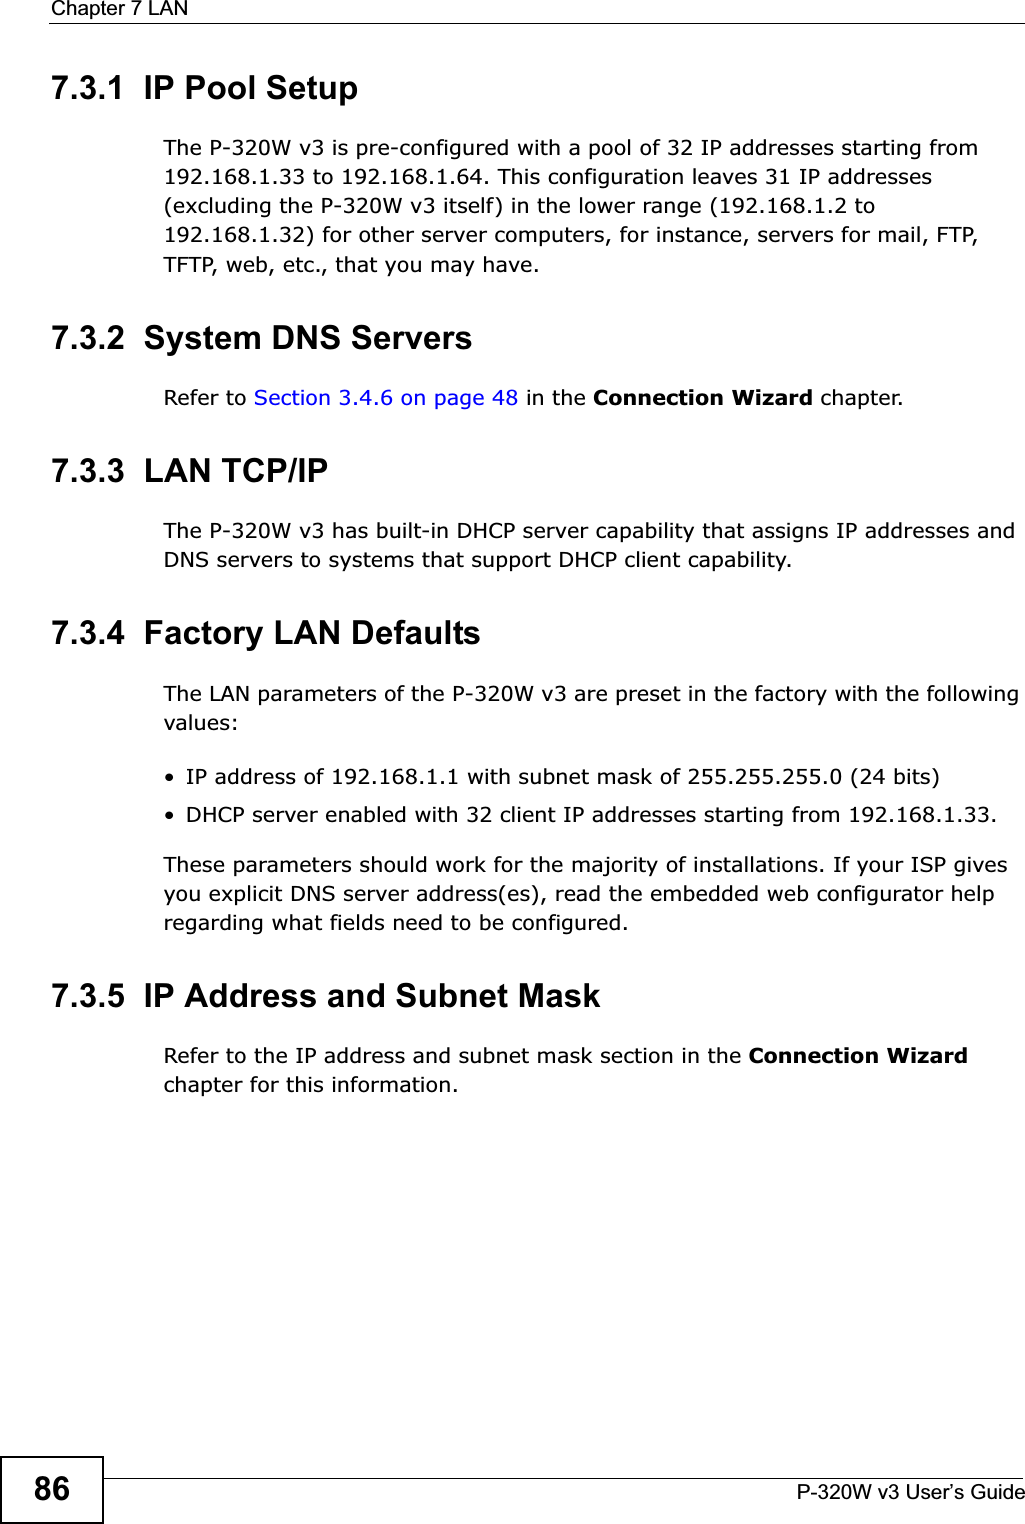 Chapter 7 LANP-320W v3 User’s Guide867.3.1  IP Pool SetupThe P-320W v3 is pre-configured with a pool of 32 IP addresses starting from 192.168.1.33 to 192.168.1.64. This configuration leaves 31 IP addresses (excluding the P-320W v3 itself) in the lower range (192.168.1.2 to 192.168.1.32) for other server computers, for instance, servers for mail, FTP, TFTP, web, etc., that you may have.7.3.2  System DNS ServersRefer to Section 3.4.6 on page 48 in the Connection Wizard chapter.7.3.3  LAN TCP/IP The P-320W v3 has built-in DHCP server capability that assigns IP addresses and DNS servers to systems that support DHCP client capability.7.3.4  Factory LAN DefaultsThe LAN parameters of the P-320W v3 are preset in the factory with the following values:• IP address of 192.168.1.1 with subnet mask of 255.255.255.0 (24 bits)• DHCP server enabled with 32 client IP addresses starting from 192.168.1.33. These parameters should work for the majority of installations. If your ISP gives you explicit DNS server address(es), read the embedded web configurator help regarding what fields need to be configured.7.3.5  IP Address and Subnet MaskRefer to the IP address and subnet mask section in the Connection Wizardchapter for this information.